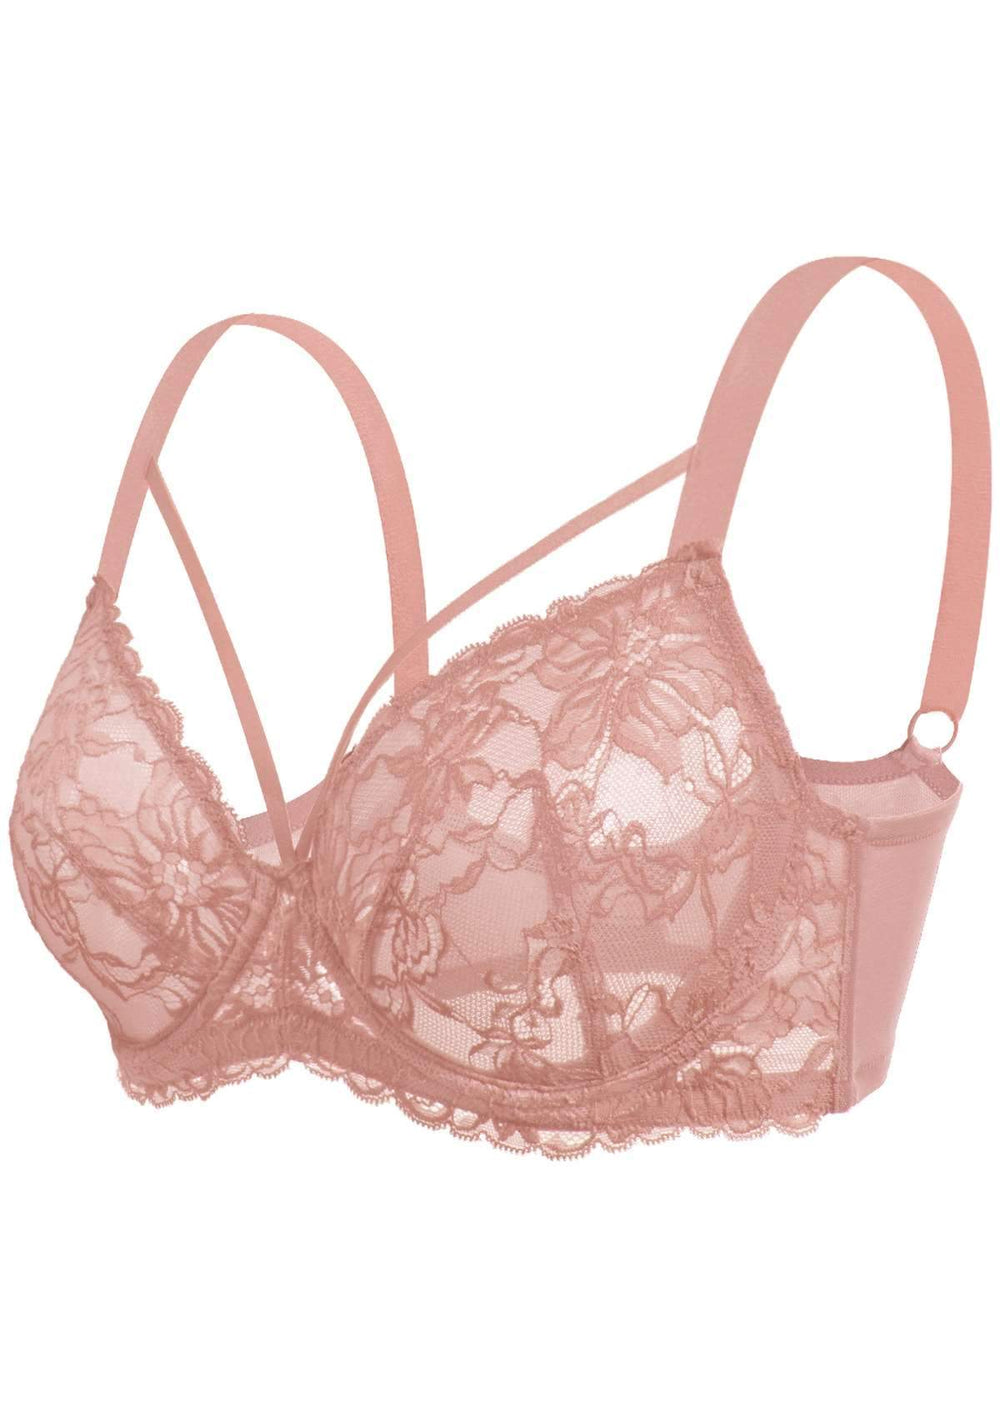 Buy Victoria's Secret Strappy Quarter Cup Corset Bra Top from the